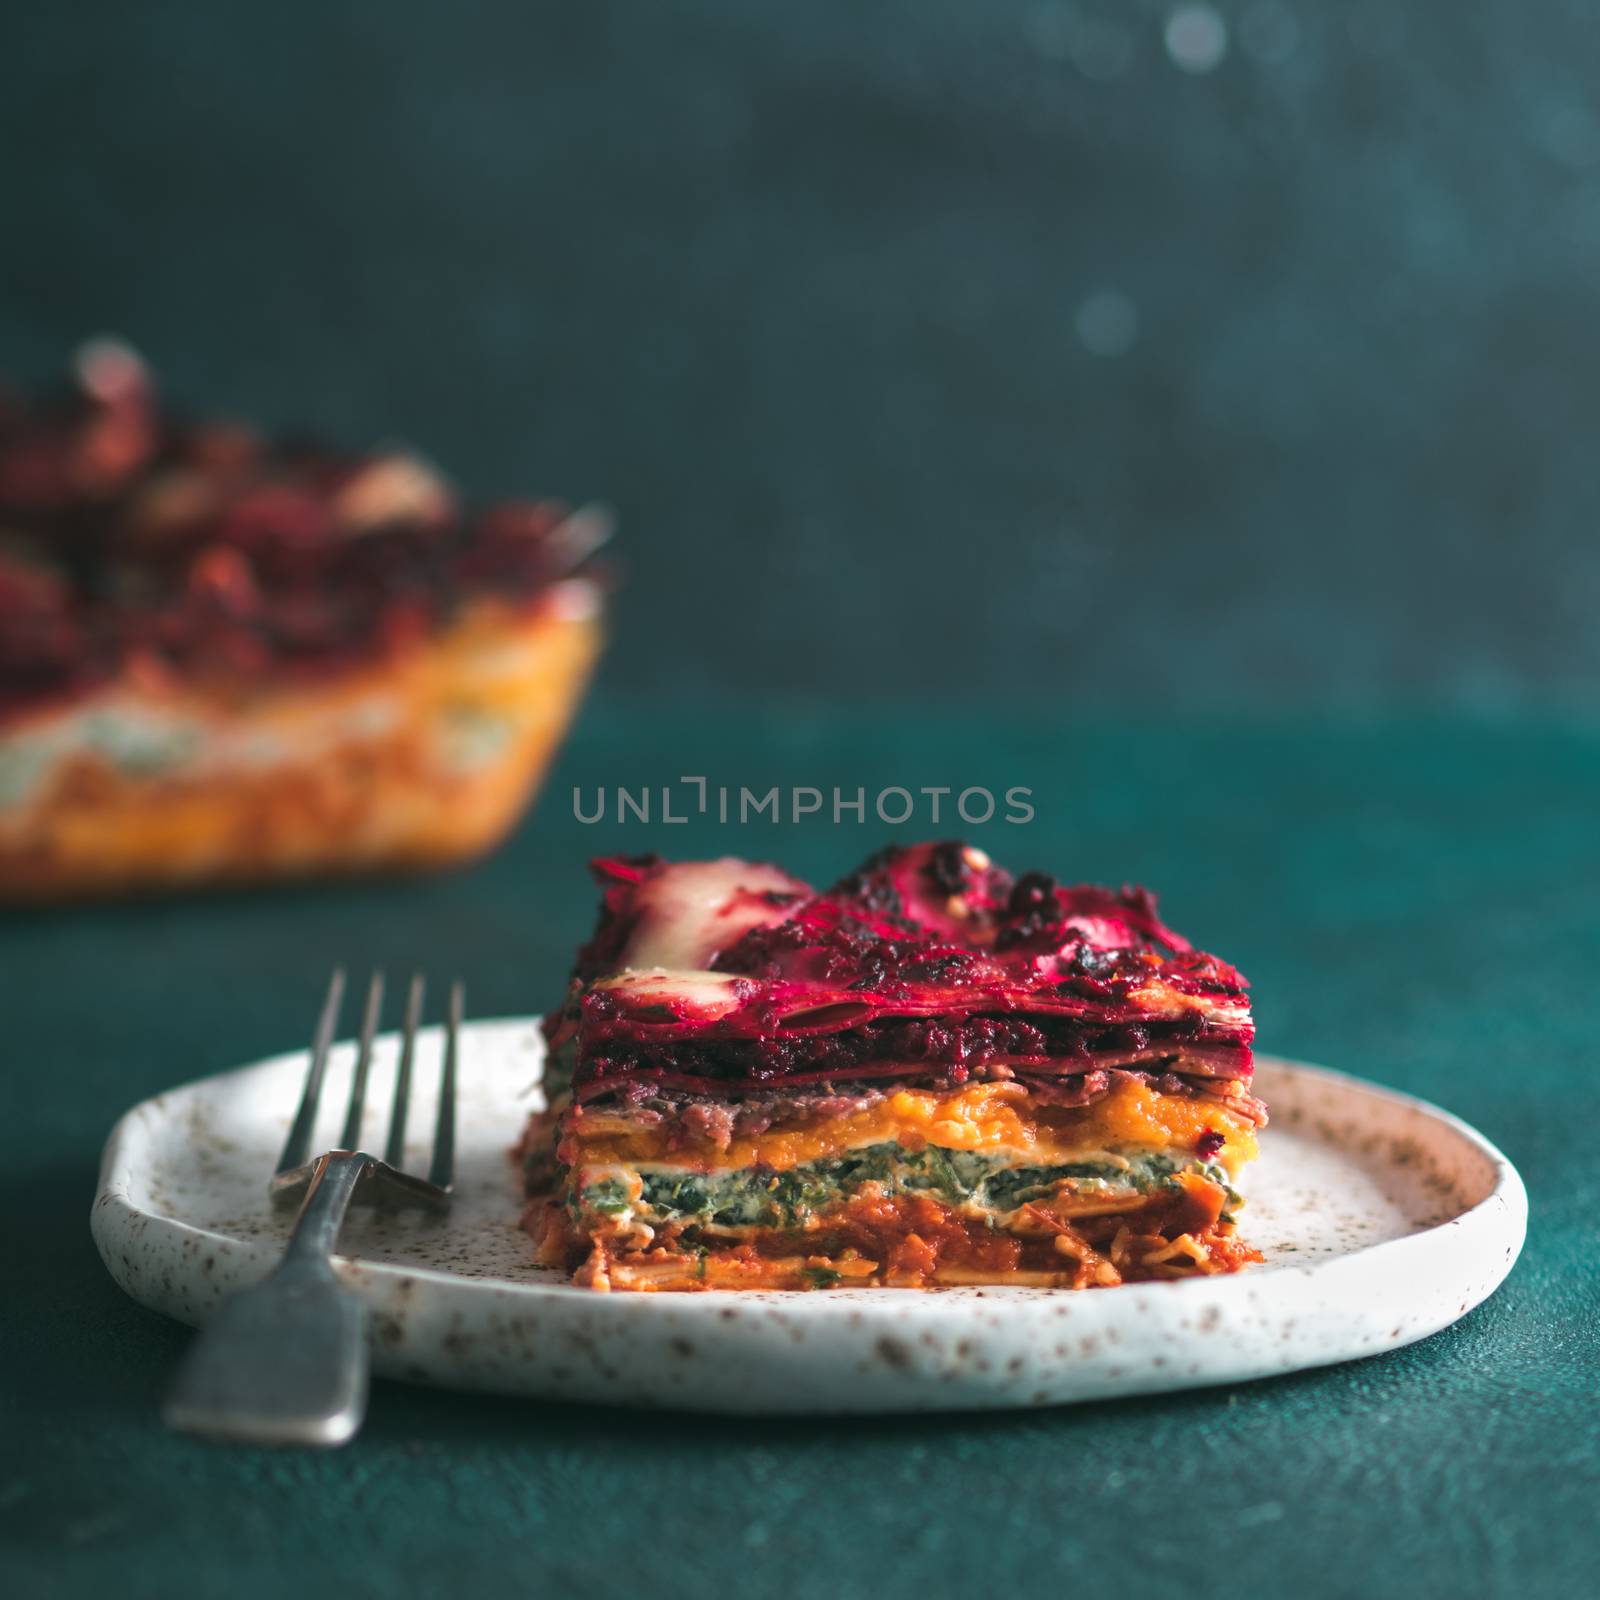 Vegetable Packed Rainbow lasagne on green background.Ideas and recipes for healthy vegetarian dinner or lunch.Lasagne with beetroot, pumpkin, mushrooms, ricotta, spinach, mozarella.Copy space for text